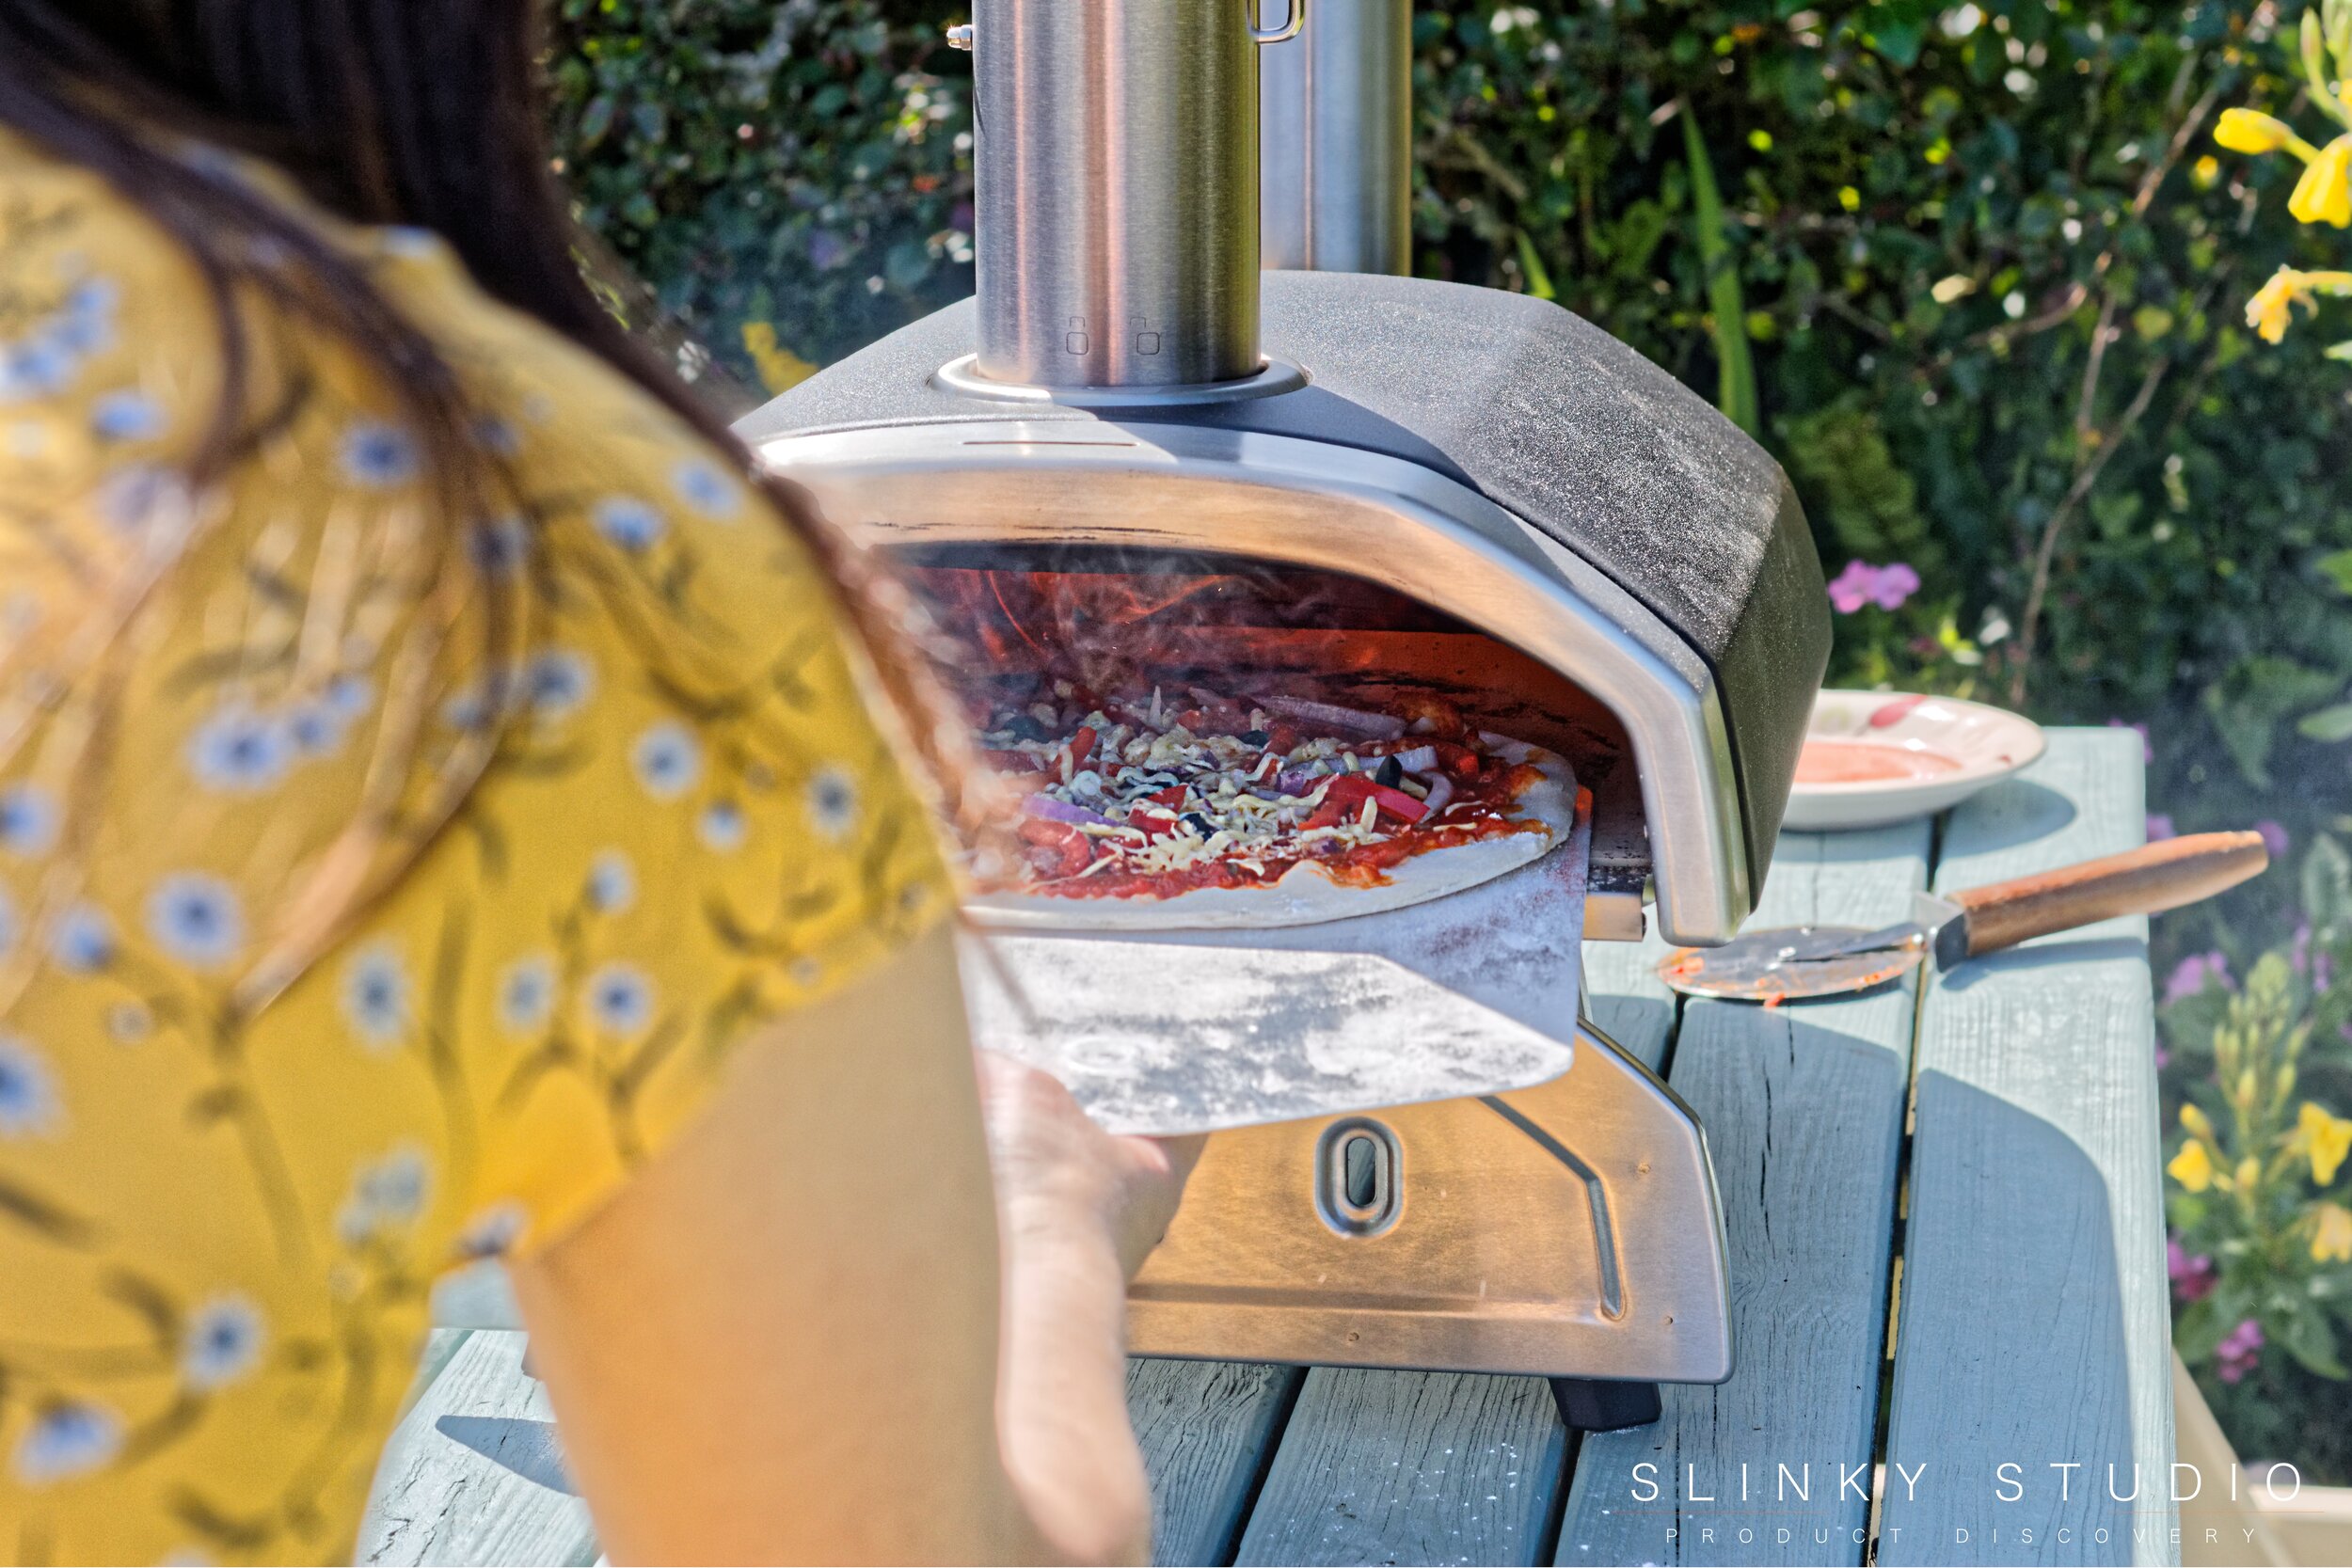 Ooni Frya Pizza Oven Wood Fired In Action Cooking.jpg